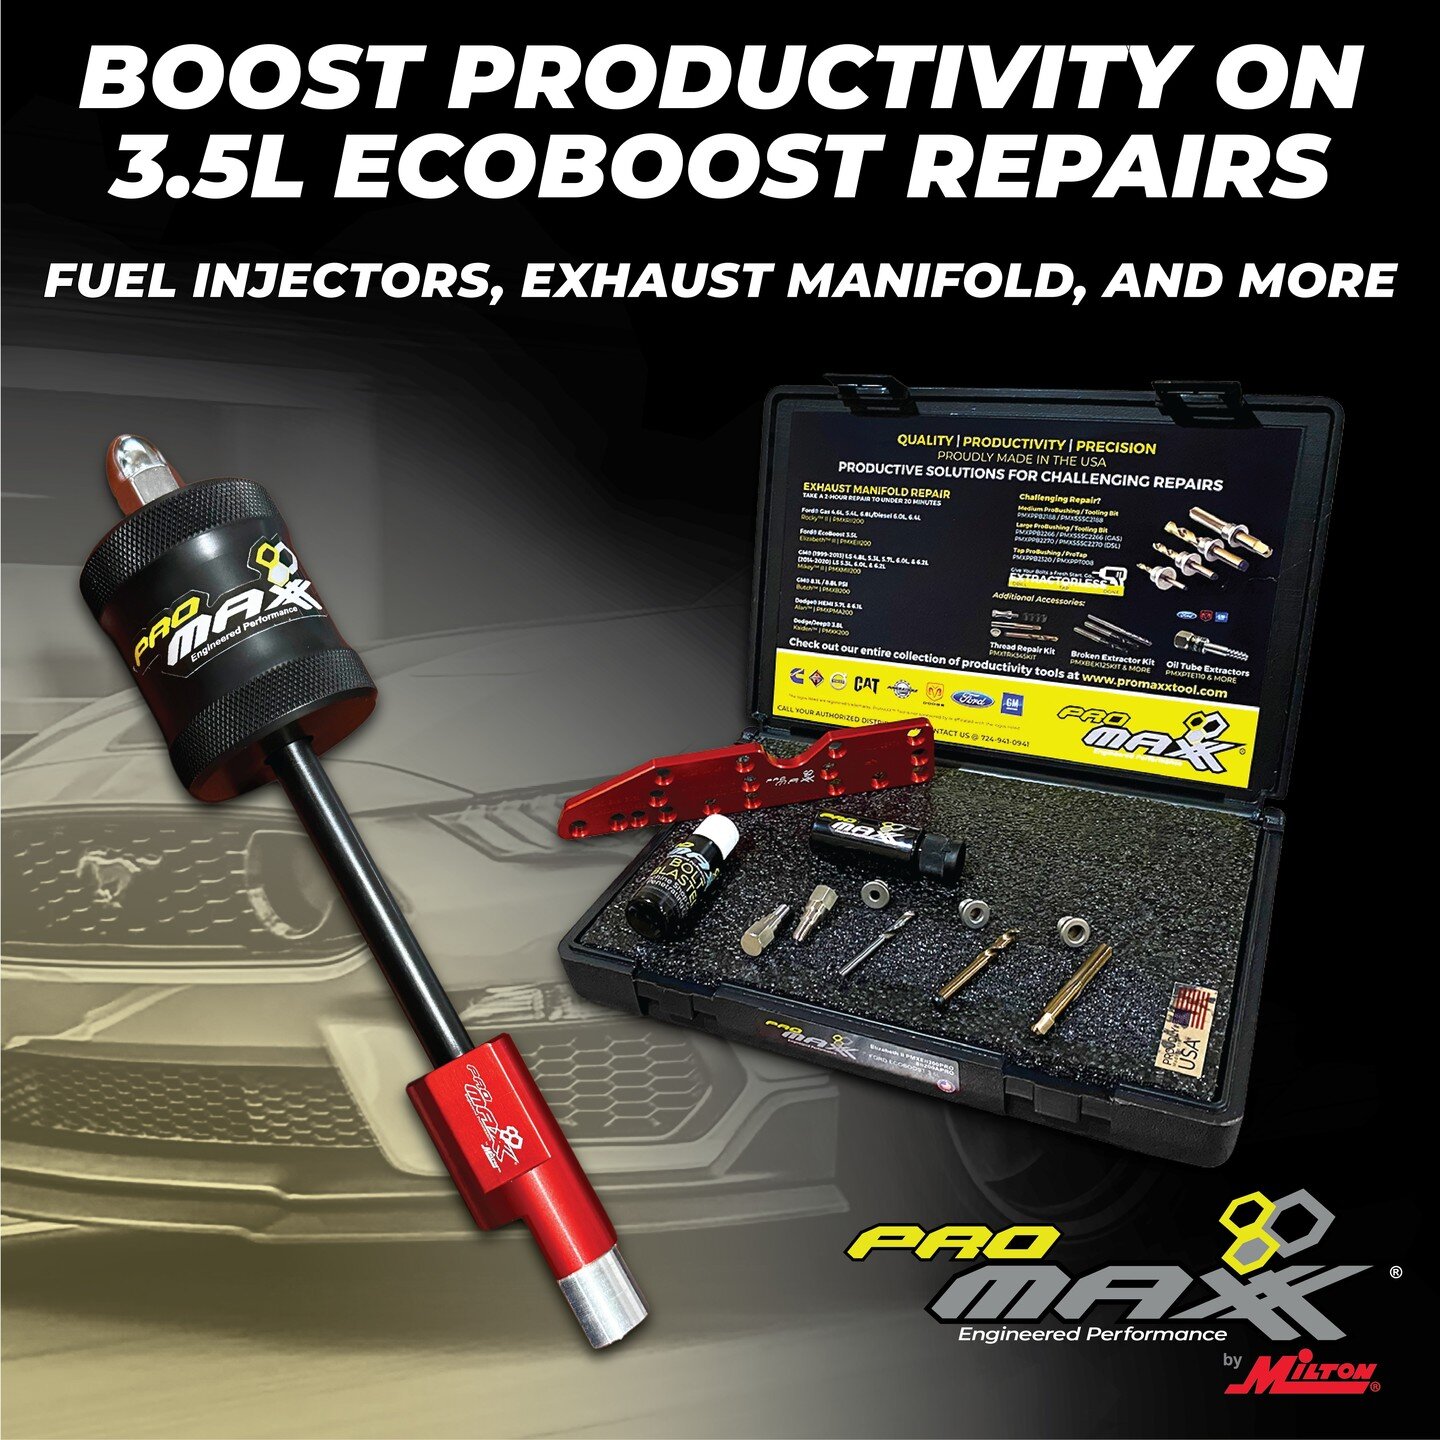 Revitalize your 3.5L EcoBoost engine with our top-notch repair kits! From fuel injector pullers to exhaust manifold fixes, we've got you covered. No more challenging repairs on EcoBoosts with time saving, 100% dead center, ProMAXX kits! Click the lin